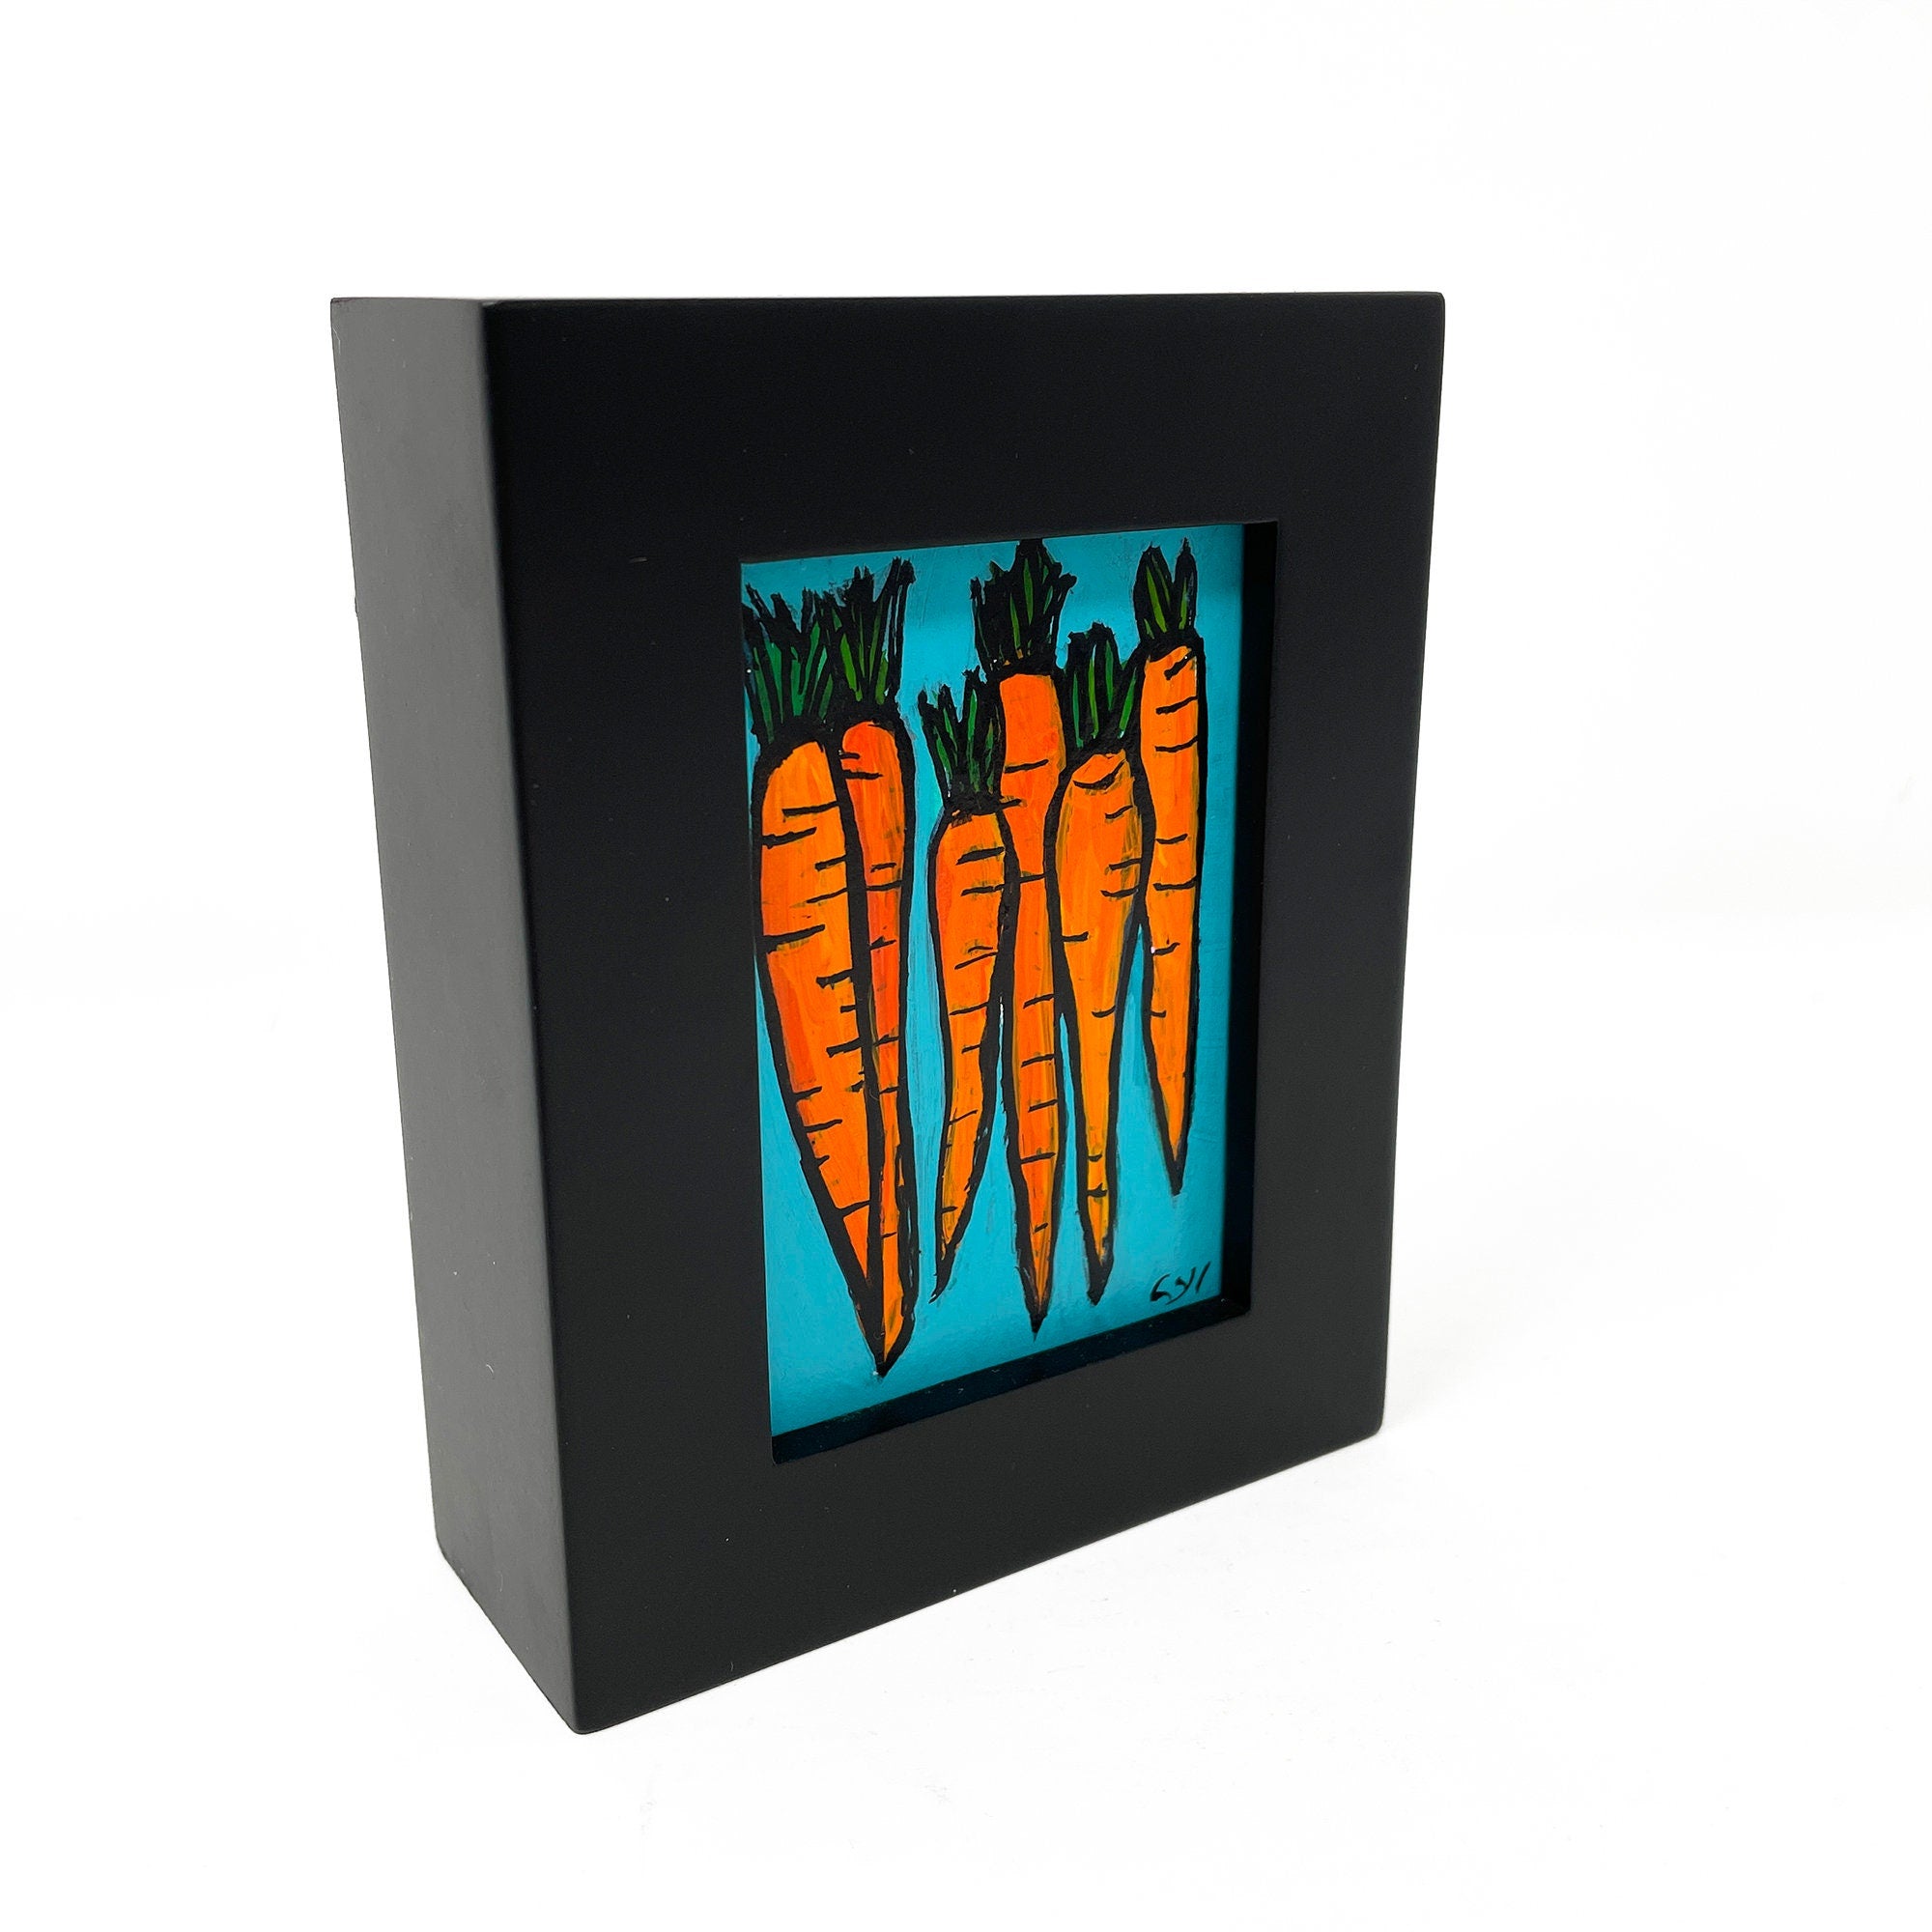 Mini Carrot Painting - Small Vegetable Art in Frame - Original Food Art for Kitchen Wall or Shelf